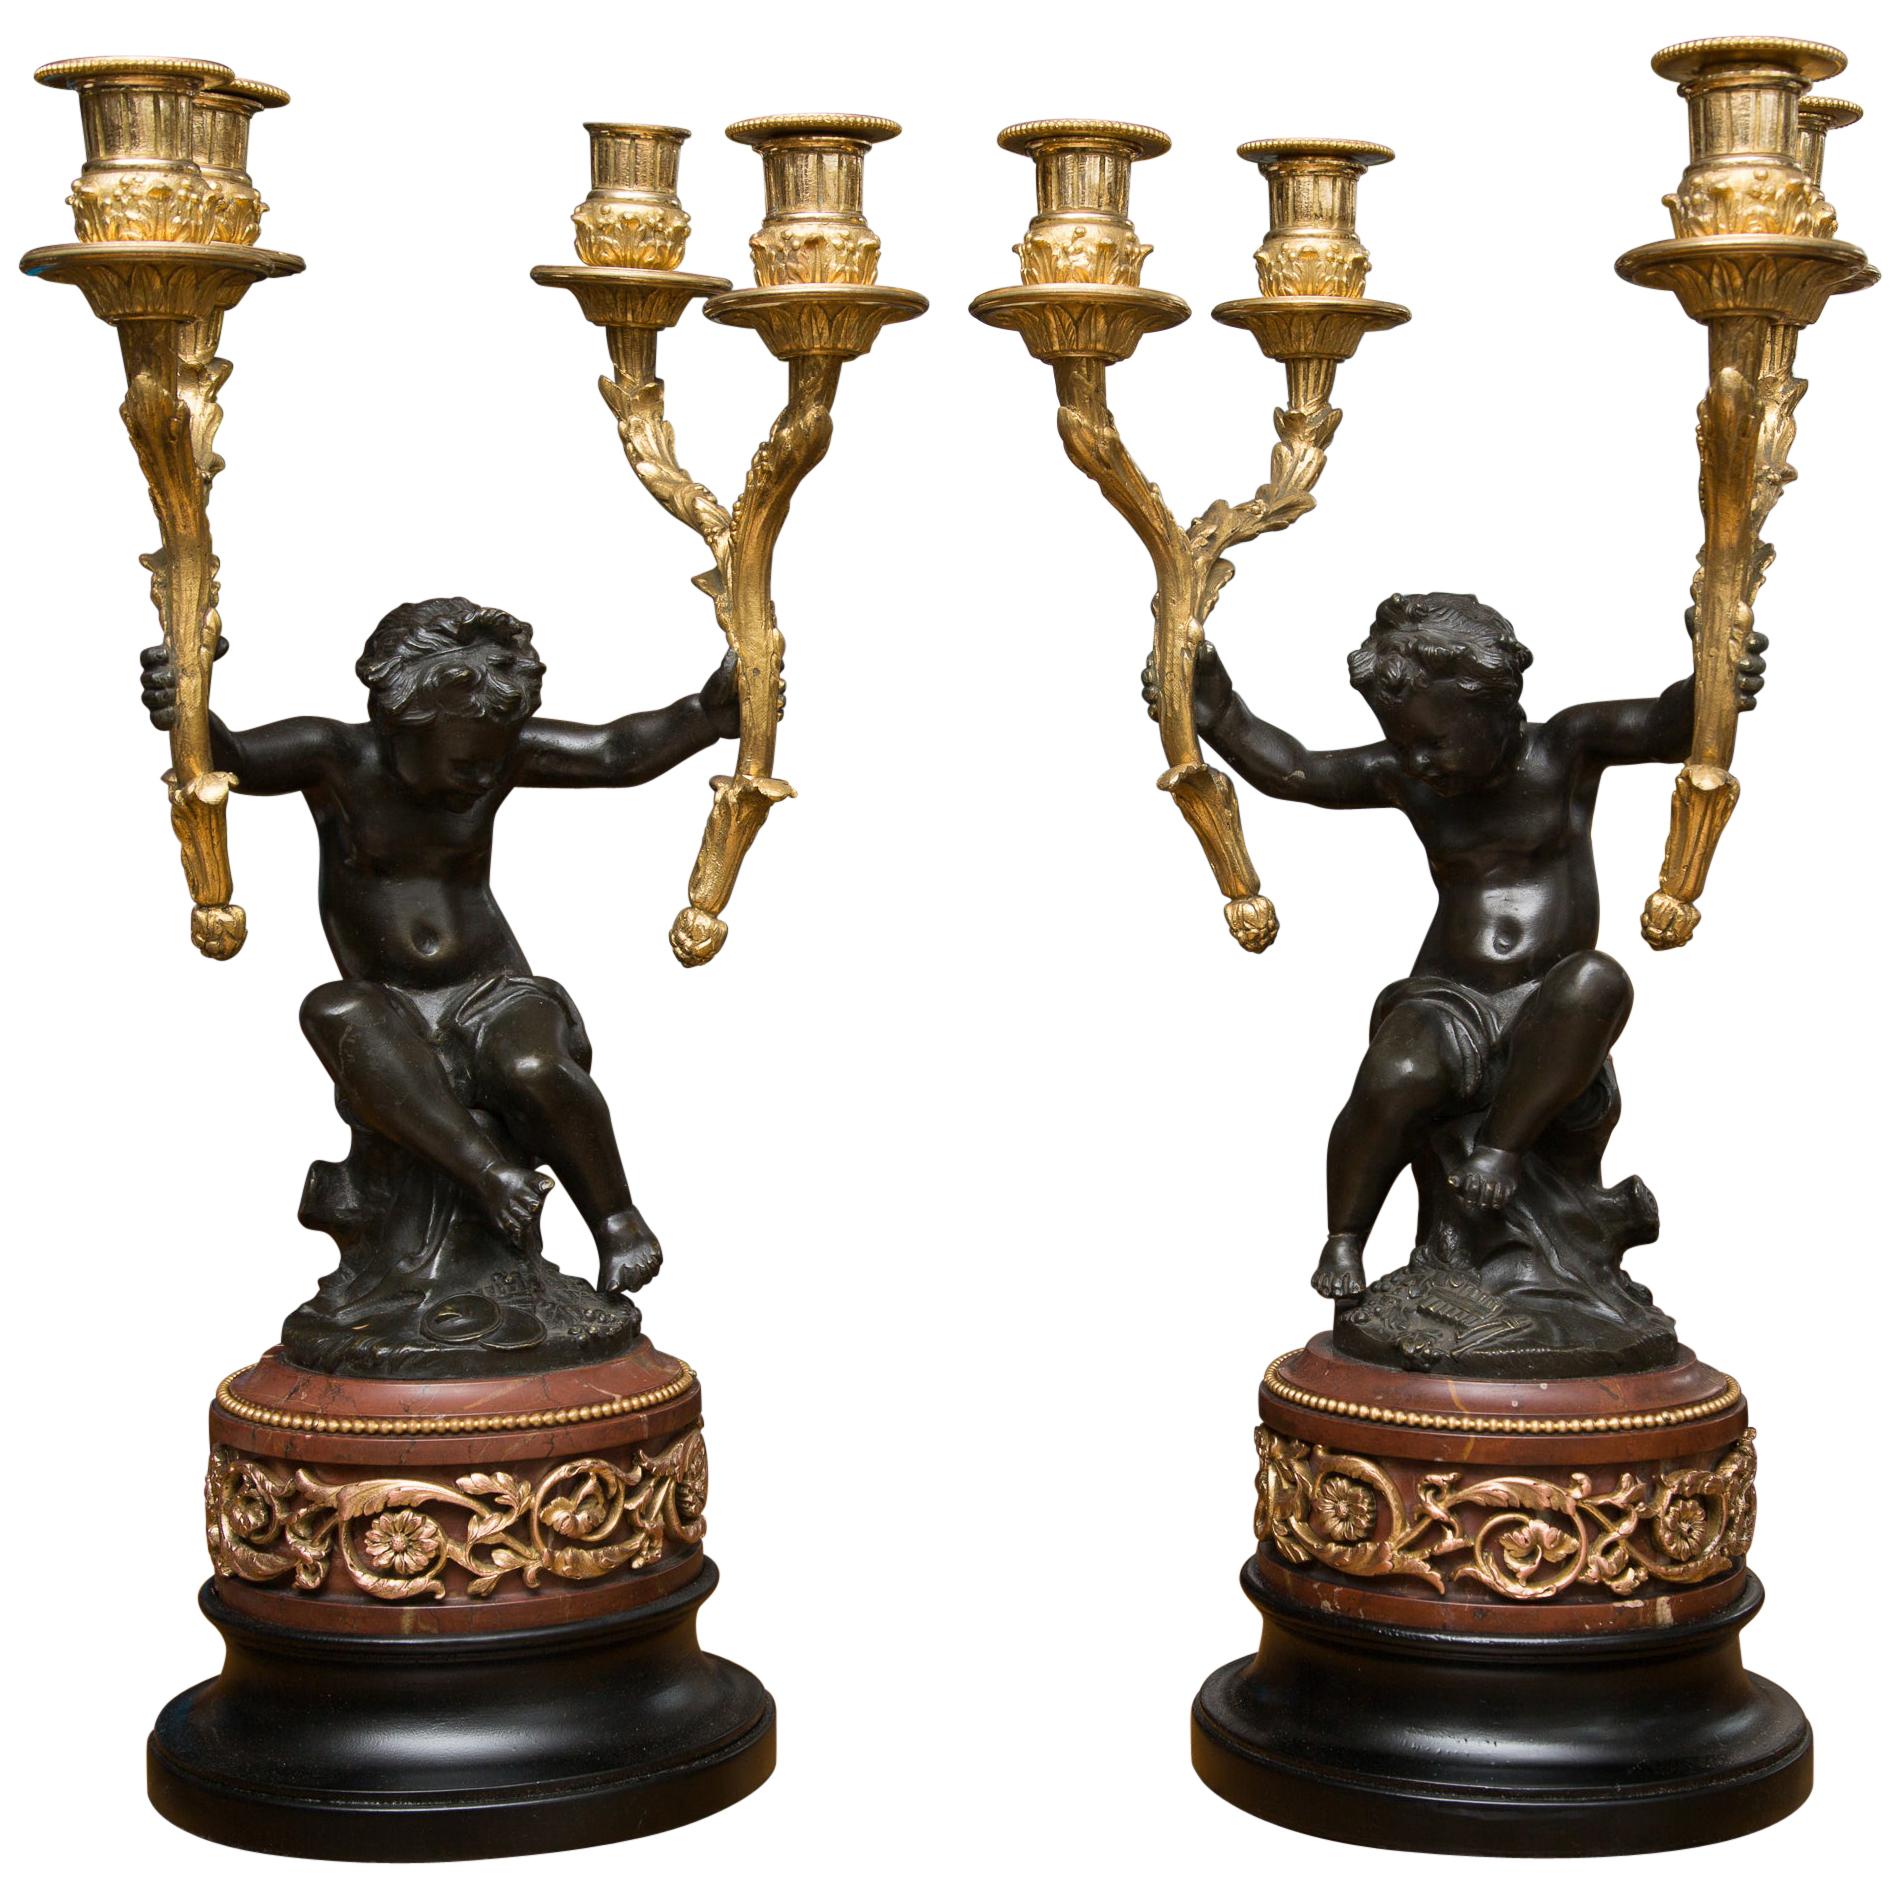 Pair of 19th Century French Gilt and Patinated Bronze Cherubs as Candelabra